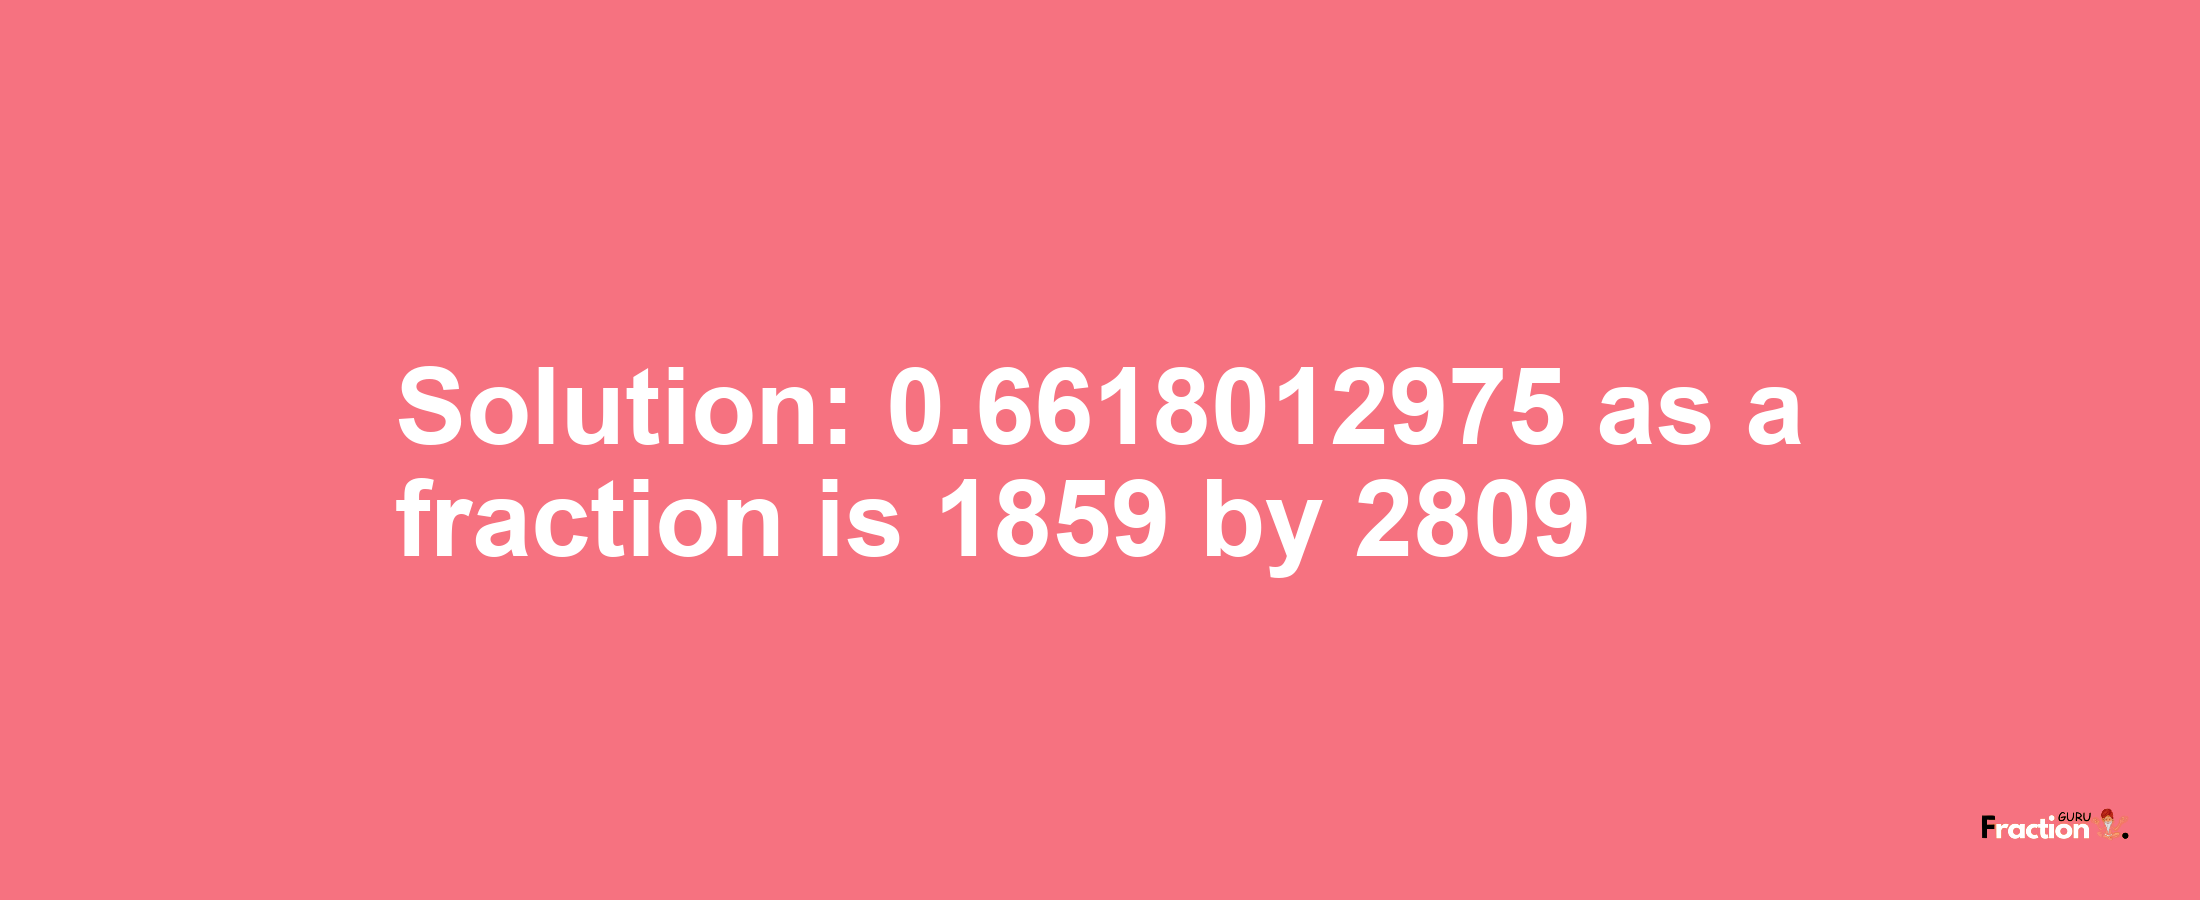 Solution:0.6618012975 as a fraction is 1859/2809